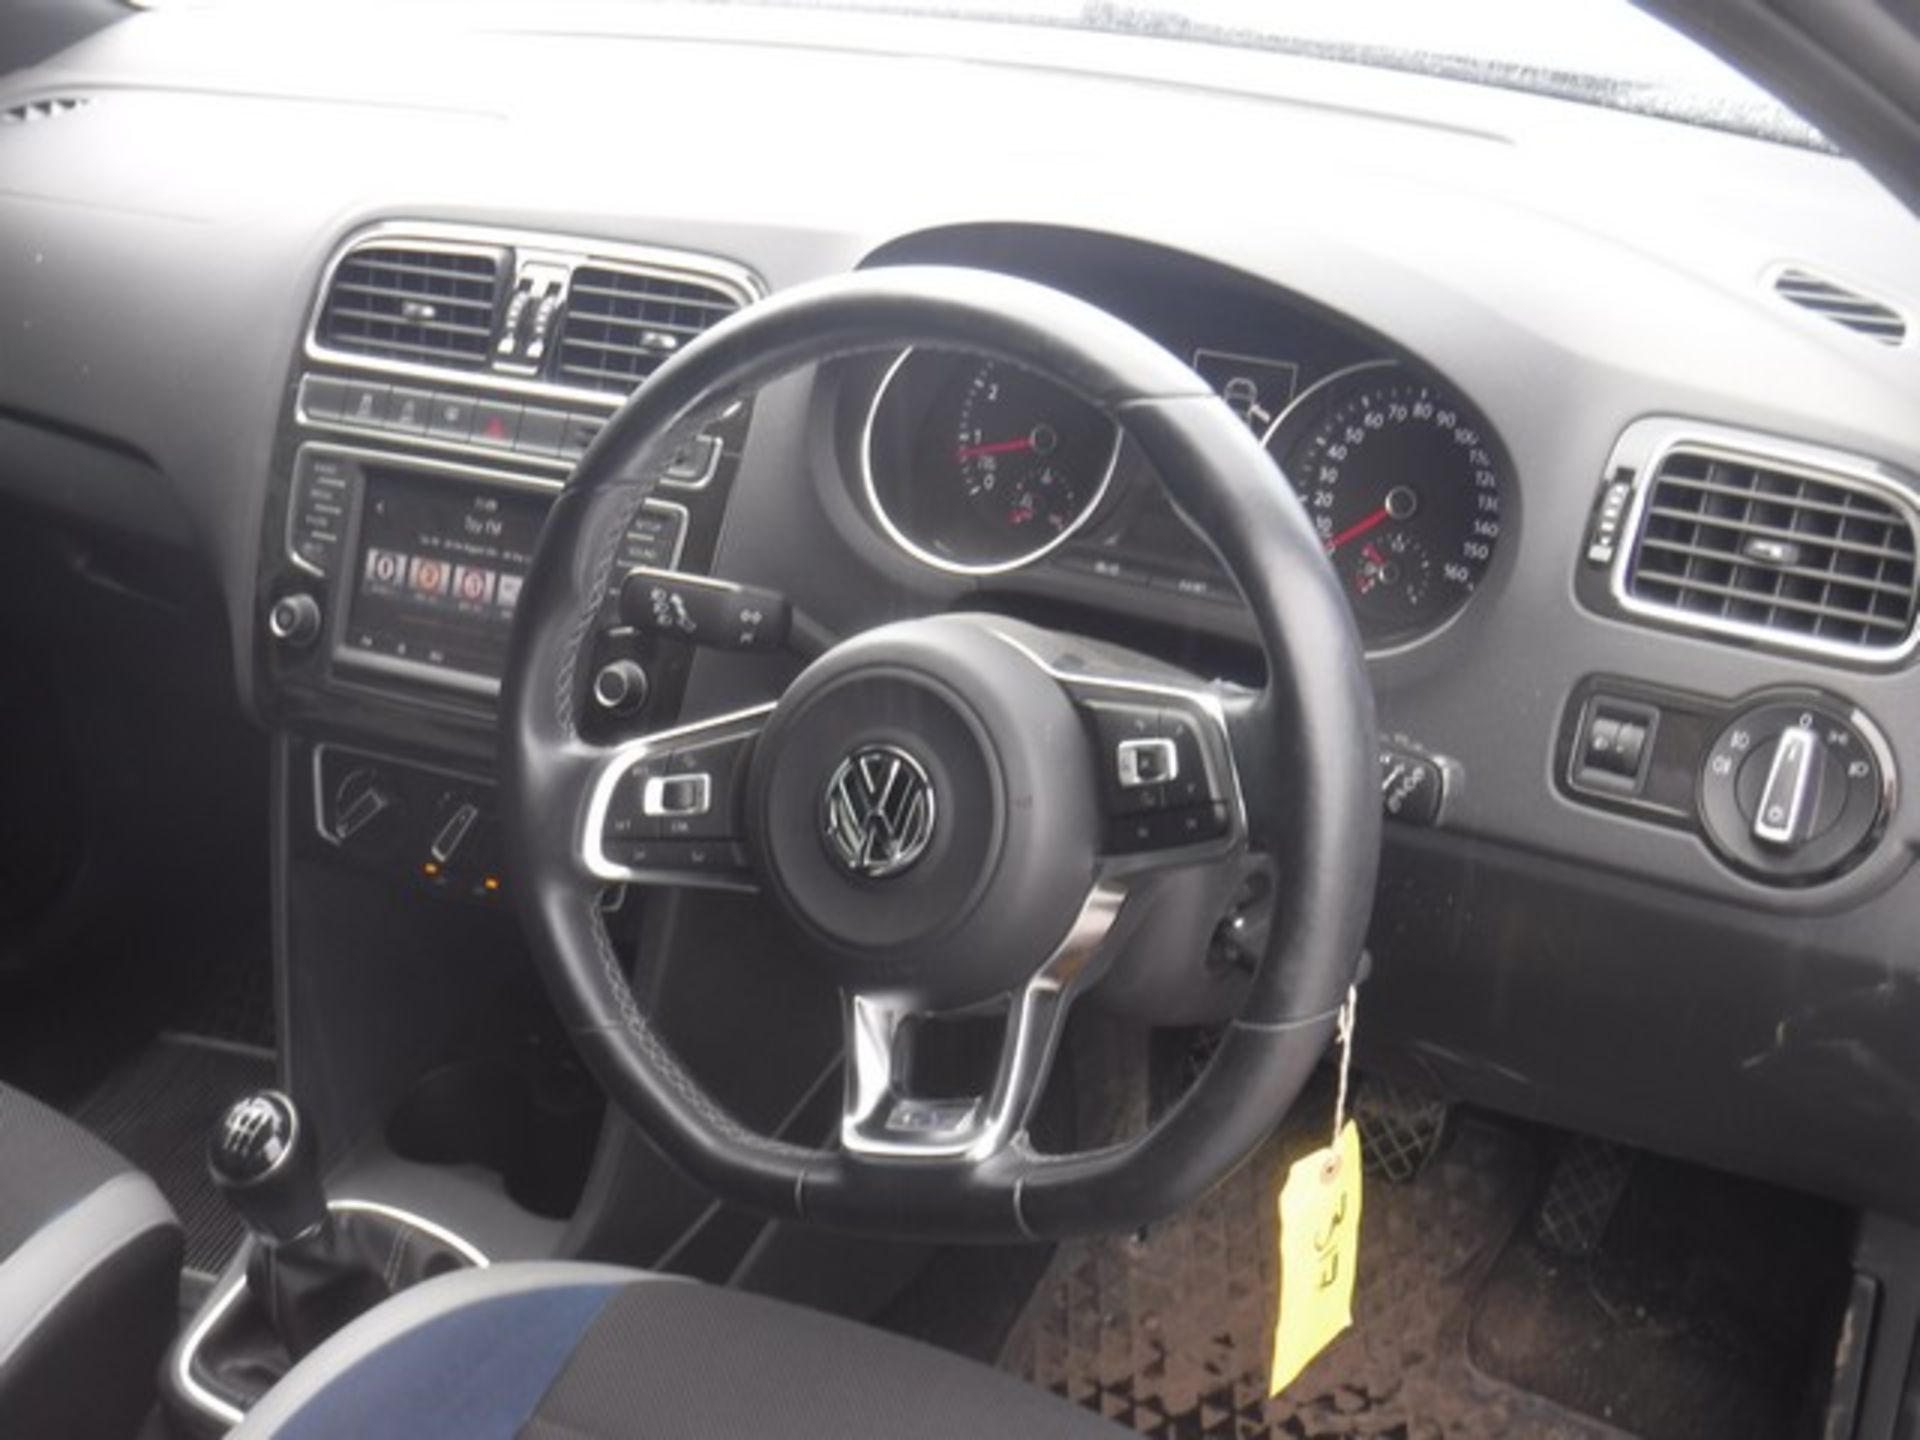 VOLKSWAGEN POLO BLUEGT - 1395cc - Image 5 of 8